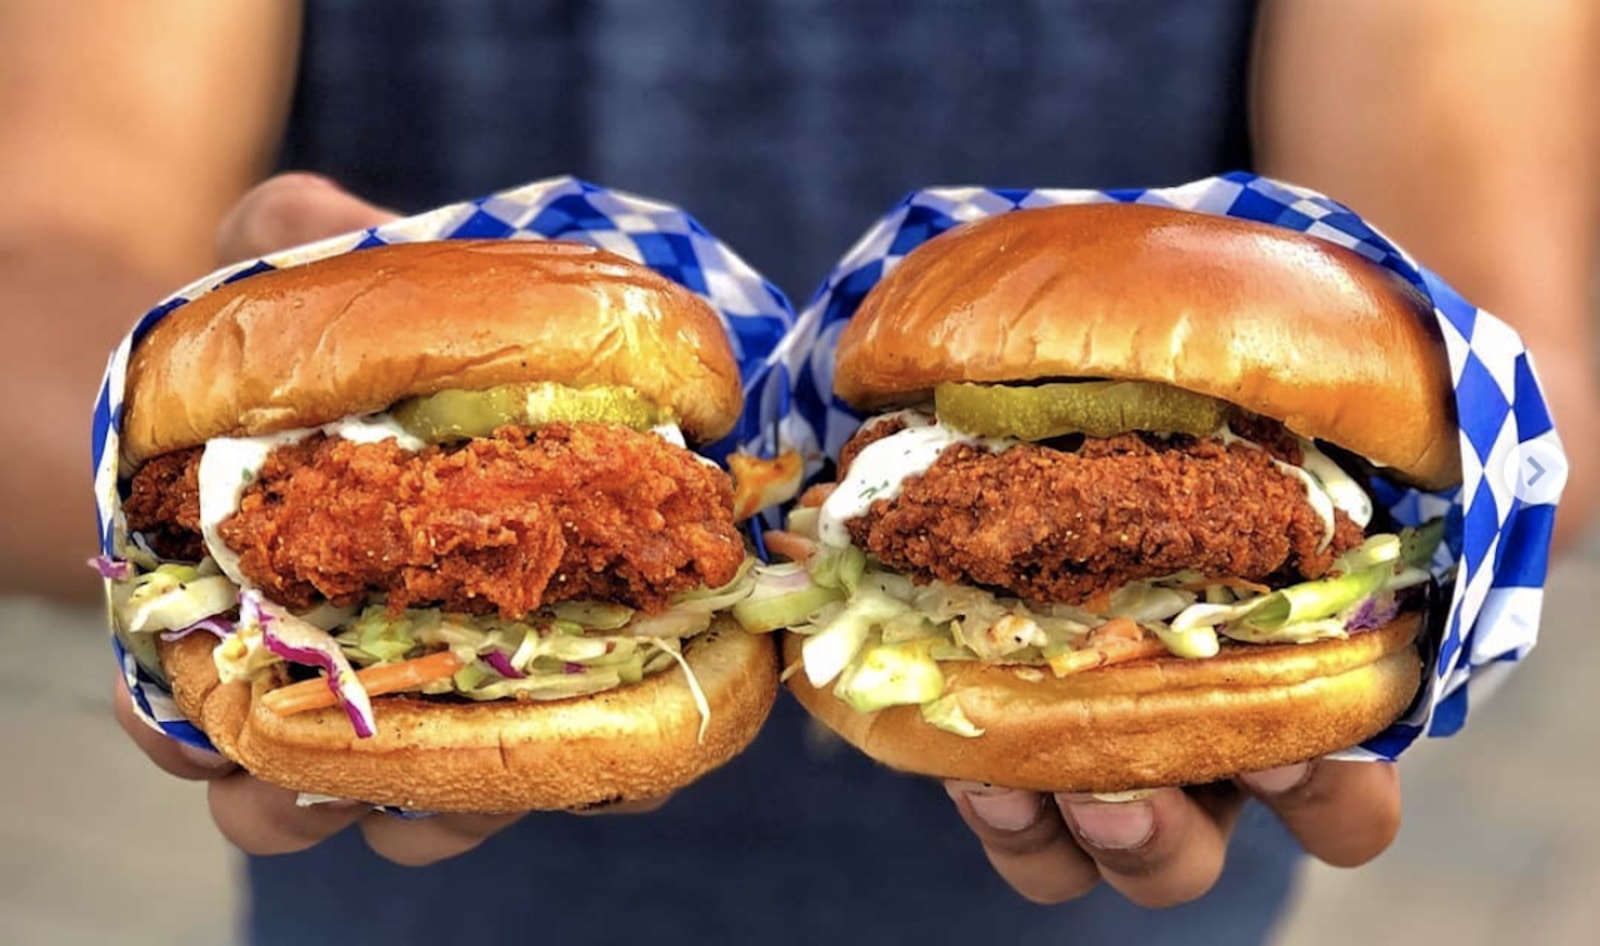 21 Vegan Fried Chicken Sandwiches That are Better Than Chick-fil-A and Popeyes